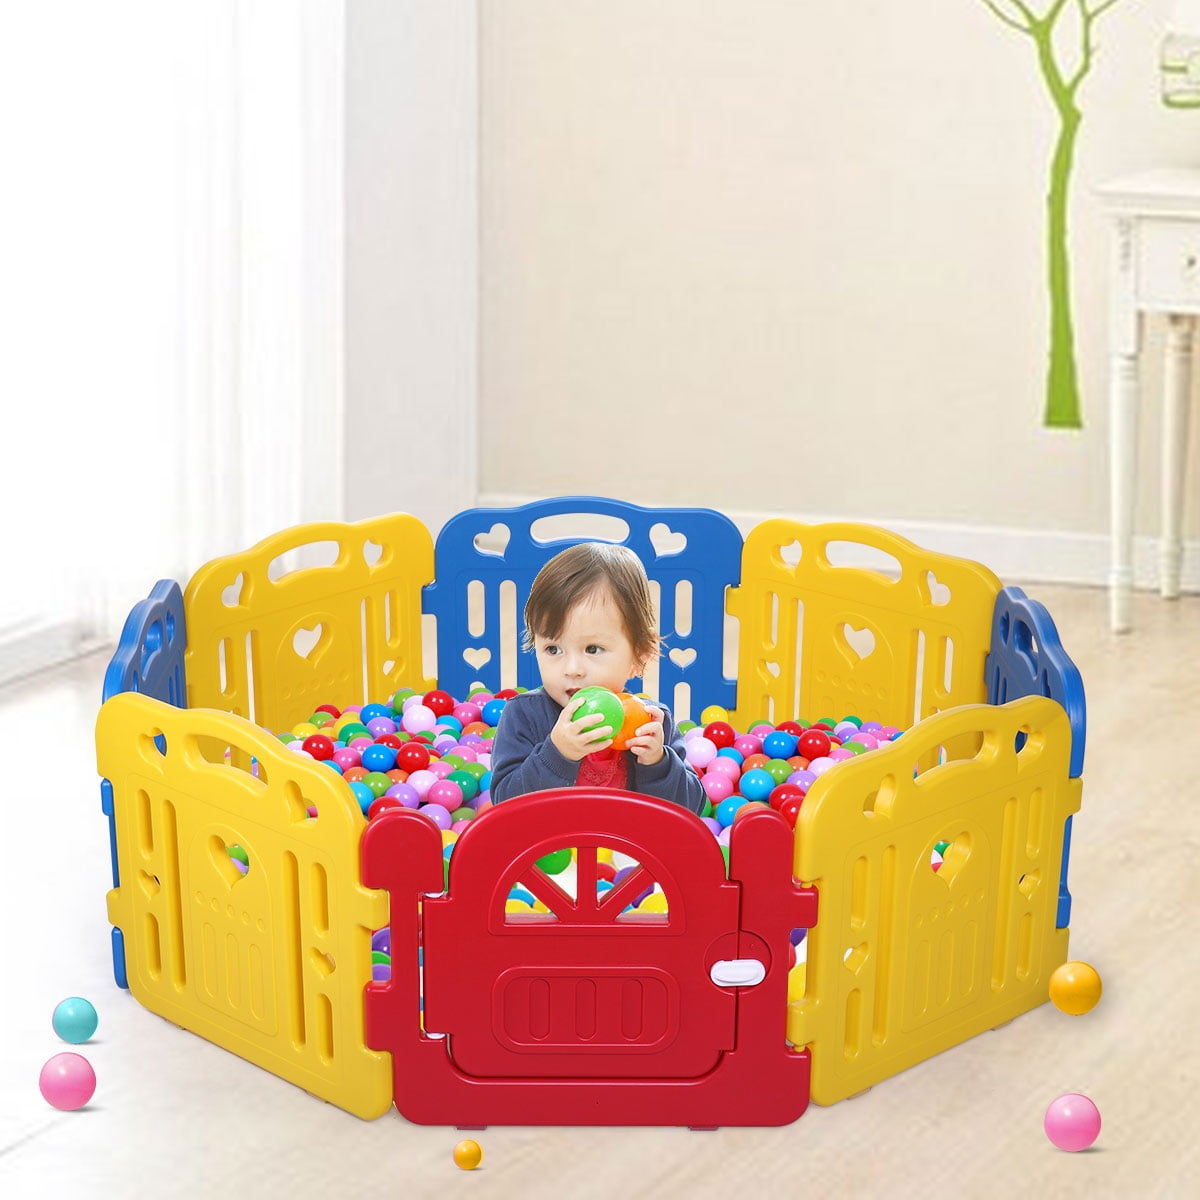 Tobbi New Wooden Baby 8 Panel Playpen Safety Activity Centre Safety Play Yard Home Indoor Outdoor New Pen 